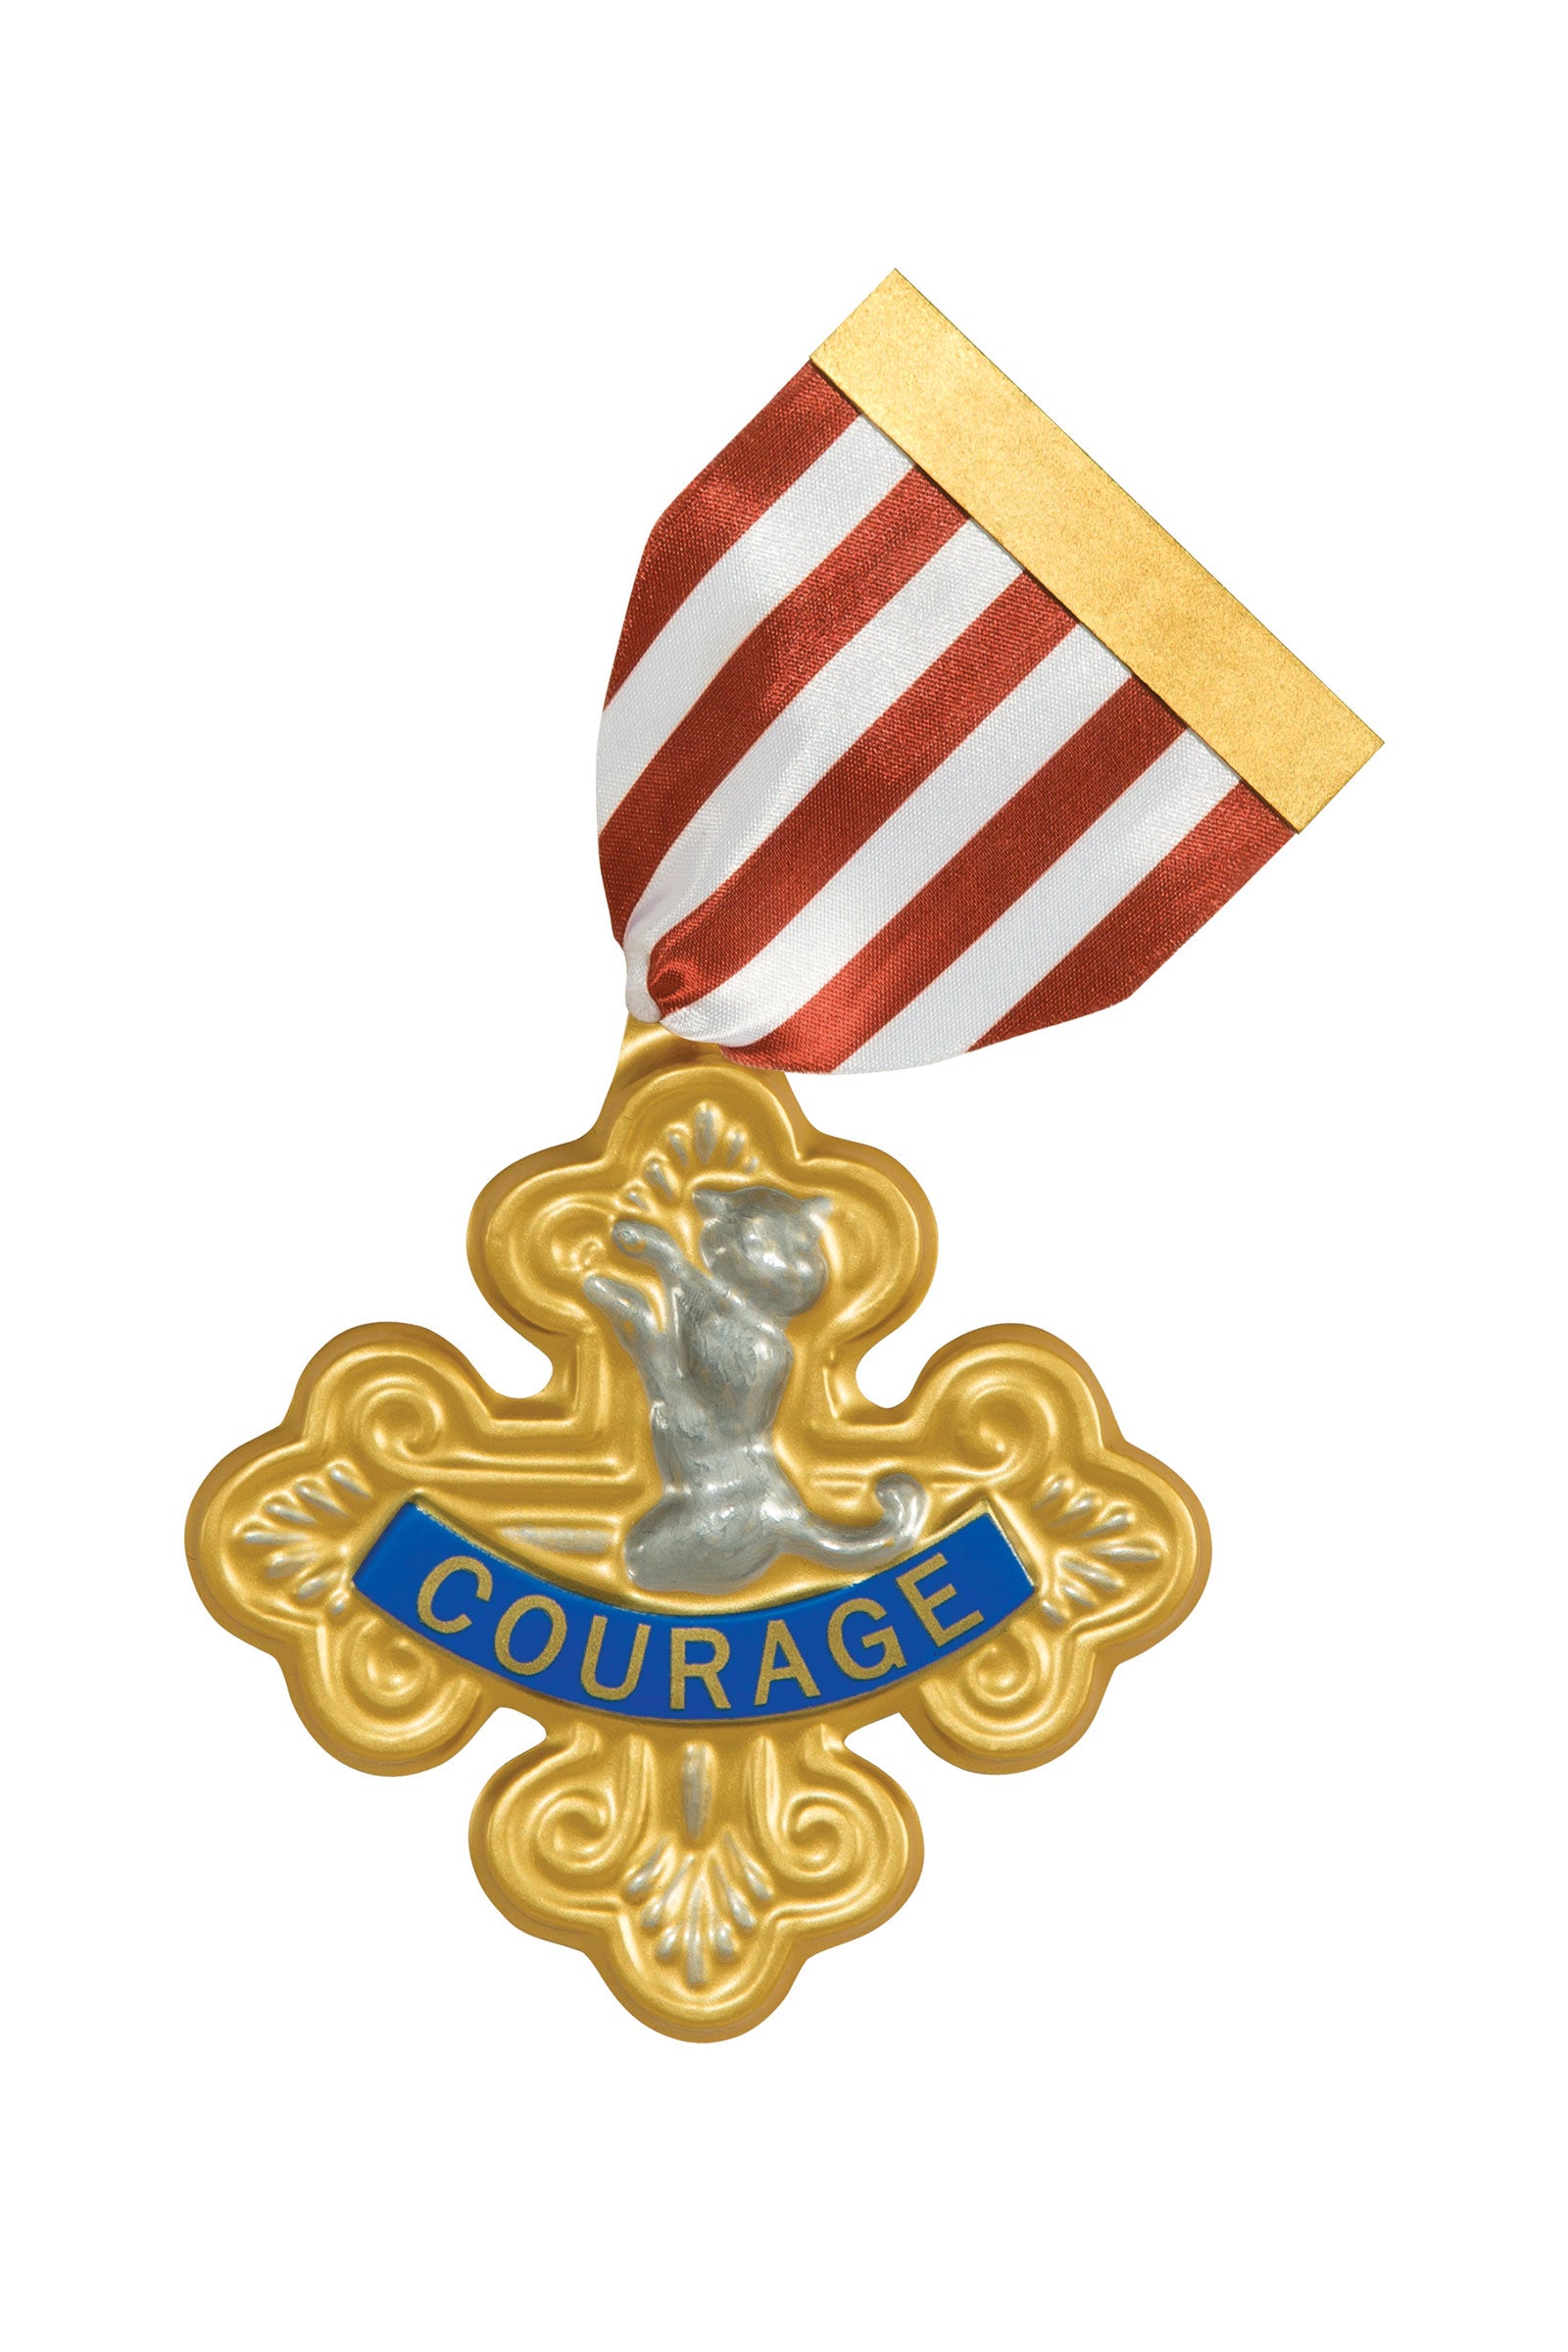 Cowardly Lion Badge Of Courage